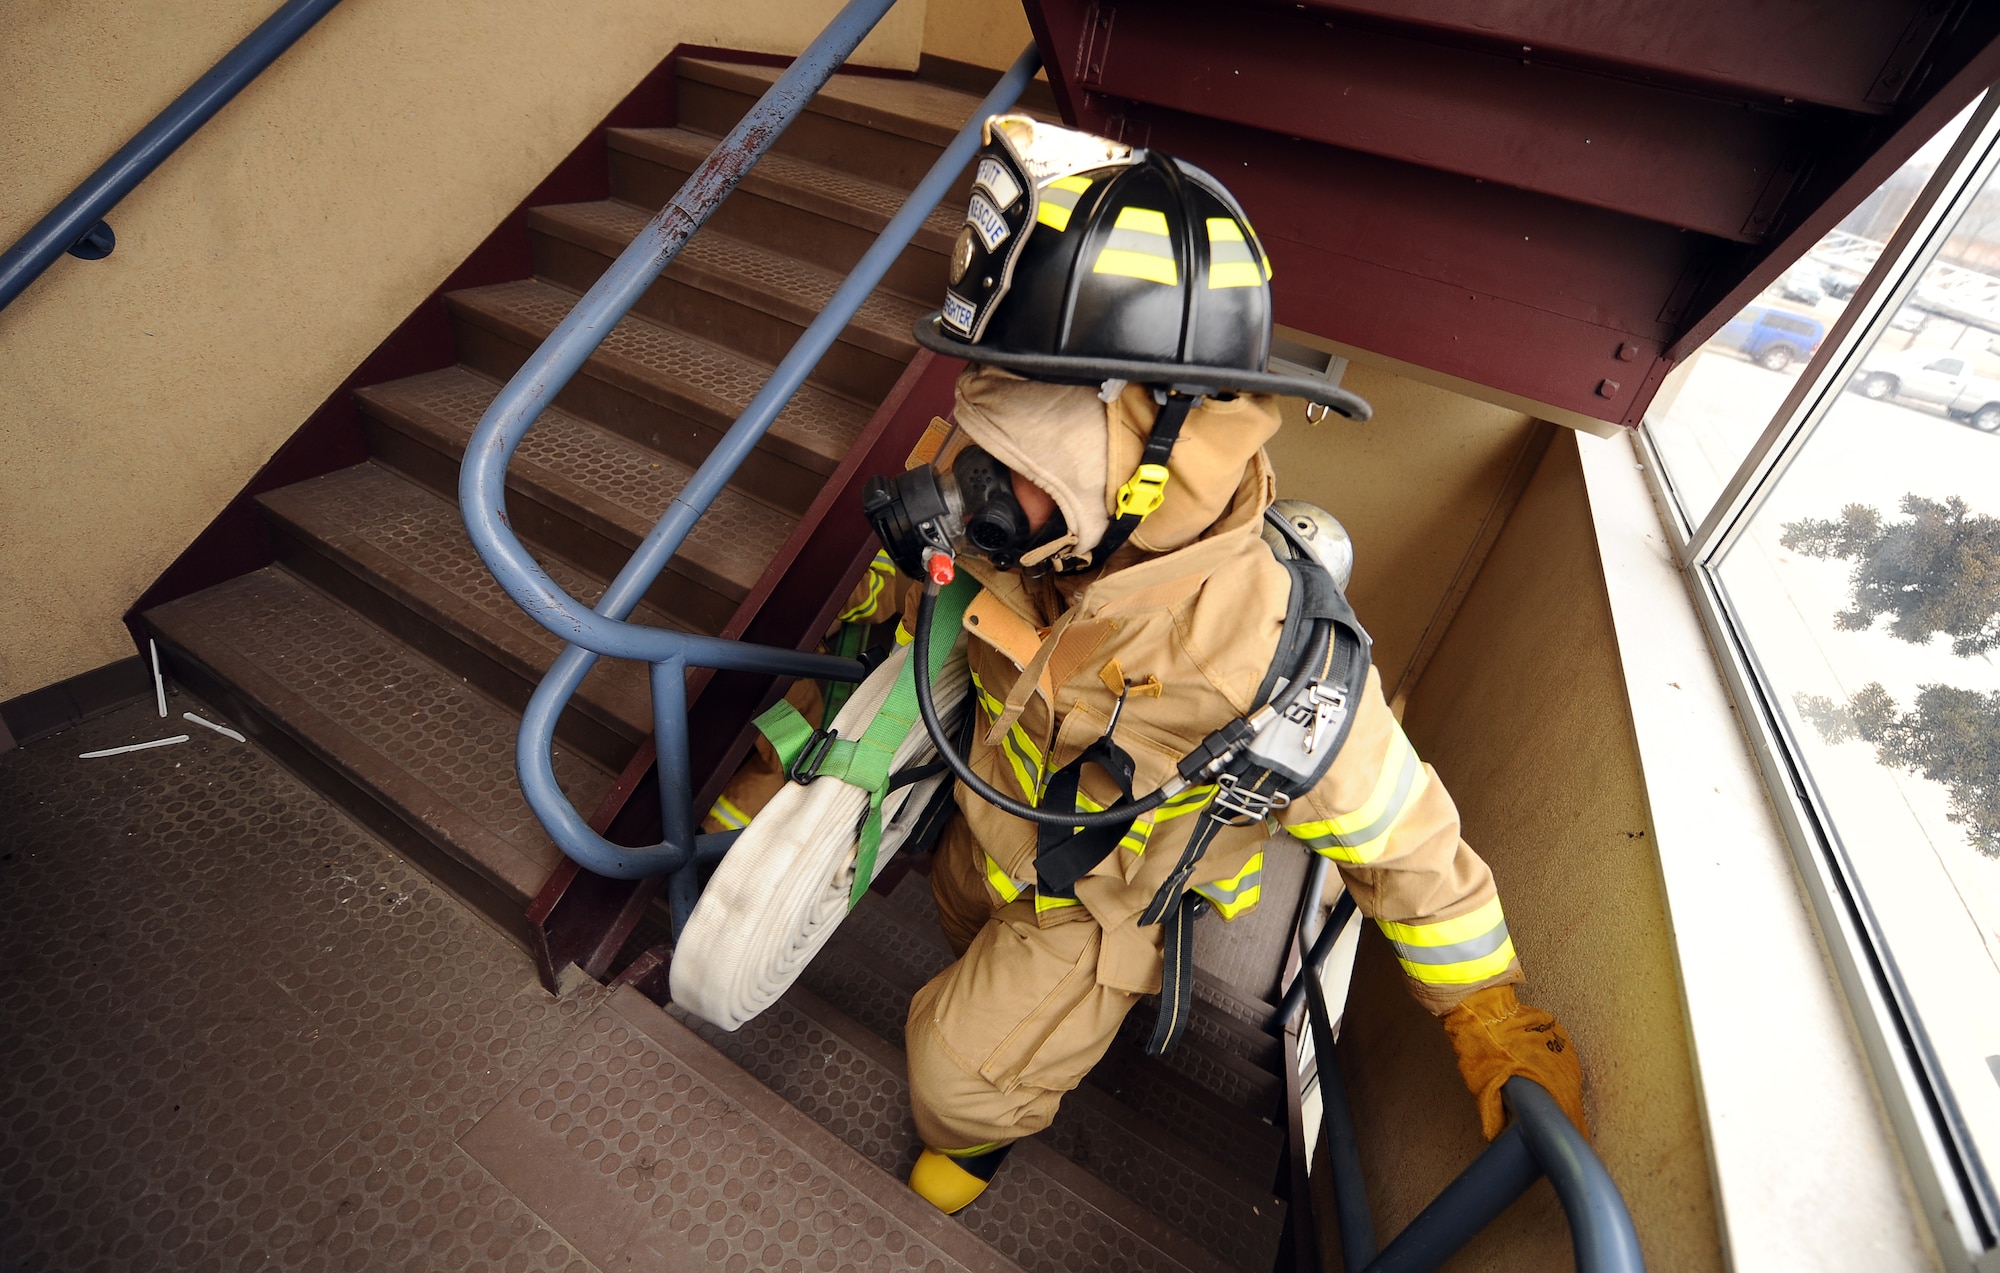 U.S. Air Force Brig. Gen. Donald Bacon, 55th Wing commander, carries the fire hose to the second floor of the now empty McCoy Hall dormitories while training with firefighters at Offutt Air Force Base, Neb., March 7.  Bacon spent a 24-hour period with Offutt's firefighters to get an up-close look into their operations and life in the firehouse.  (U.S. Air Force photo by Josh Plueger/Released).